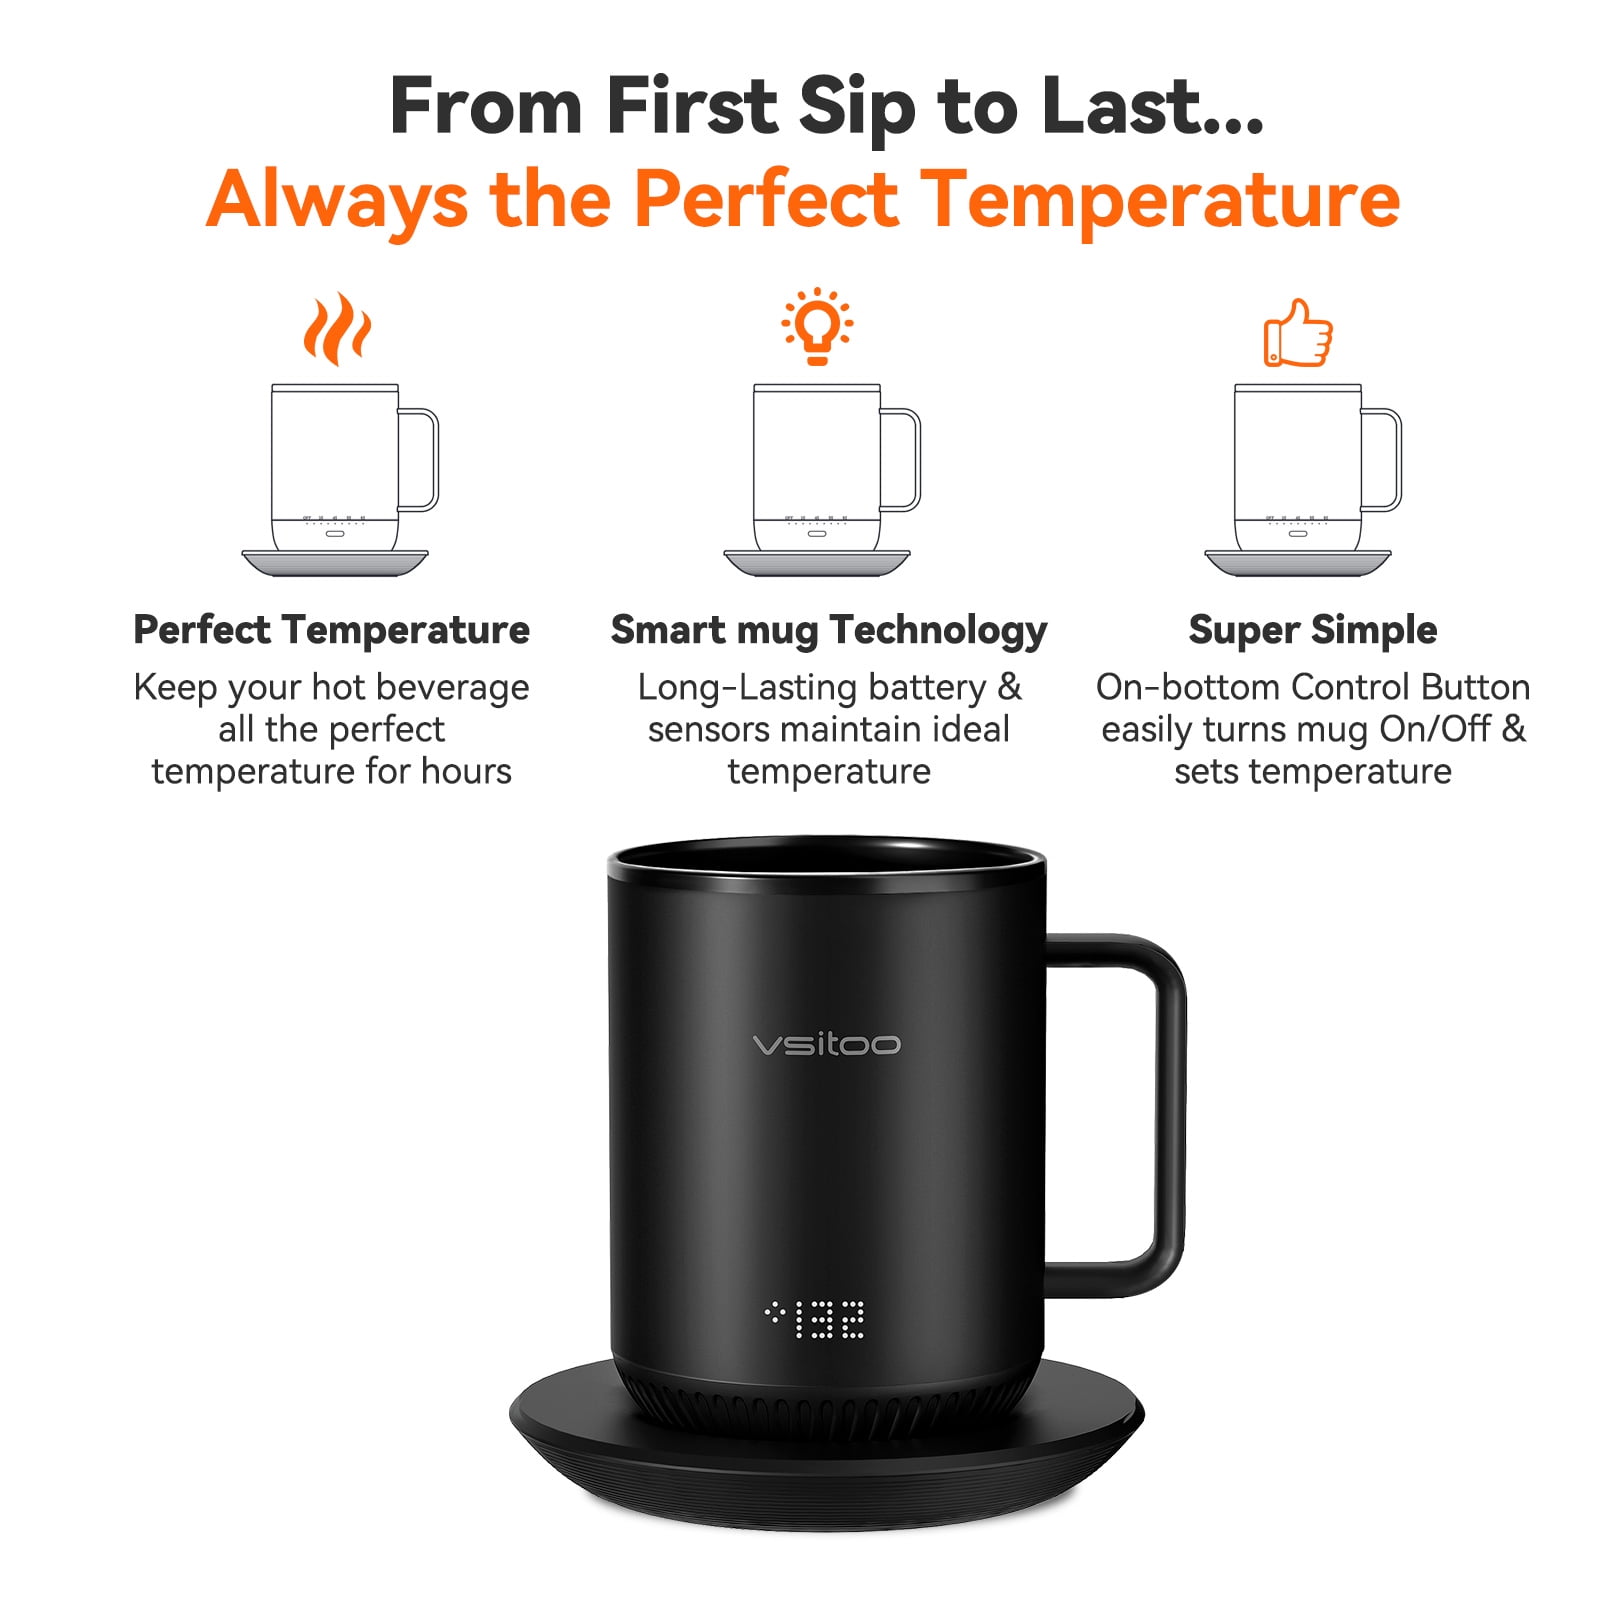 VSITOO Temperature Control Smart Mug 2 - Keep Your Coffee Hot All